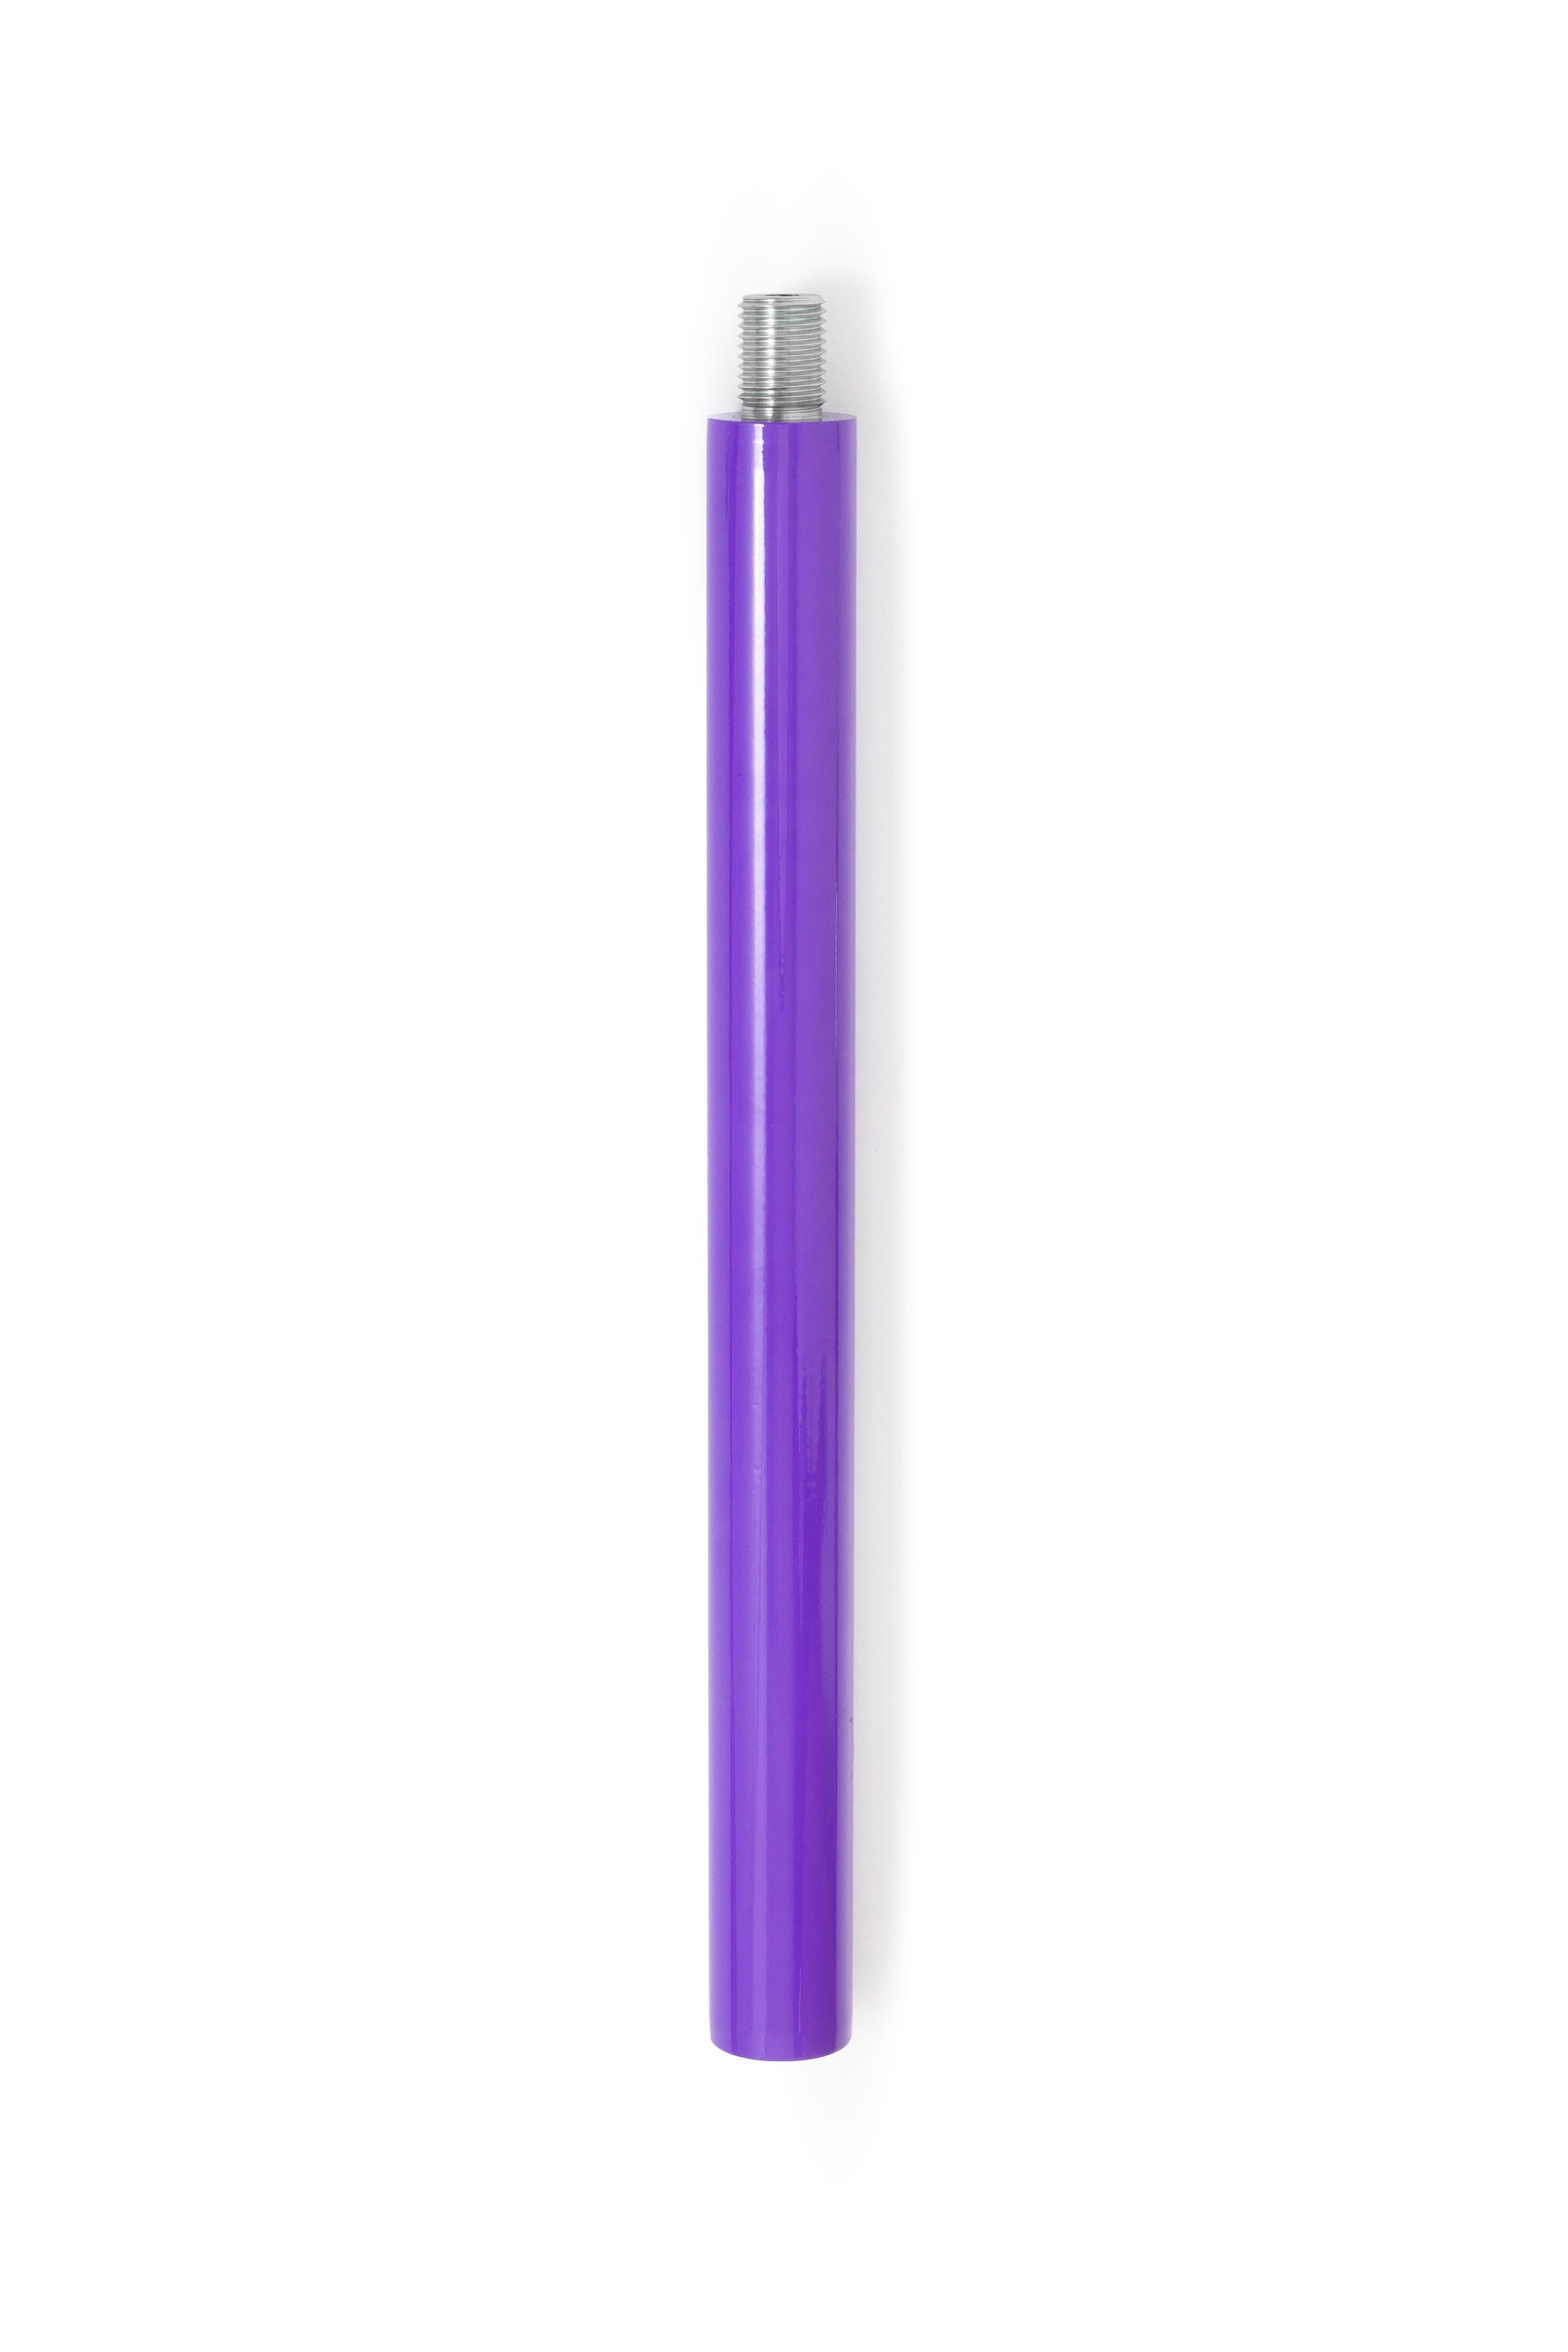 Dance Pole Extensions Purple Powder Coated